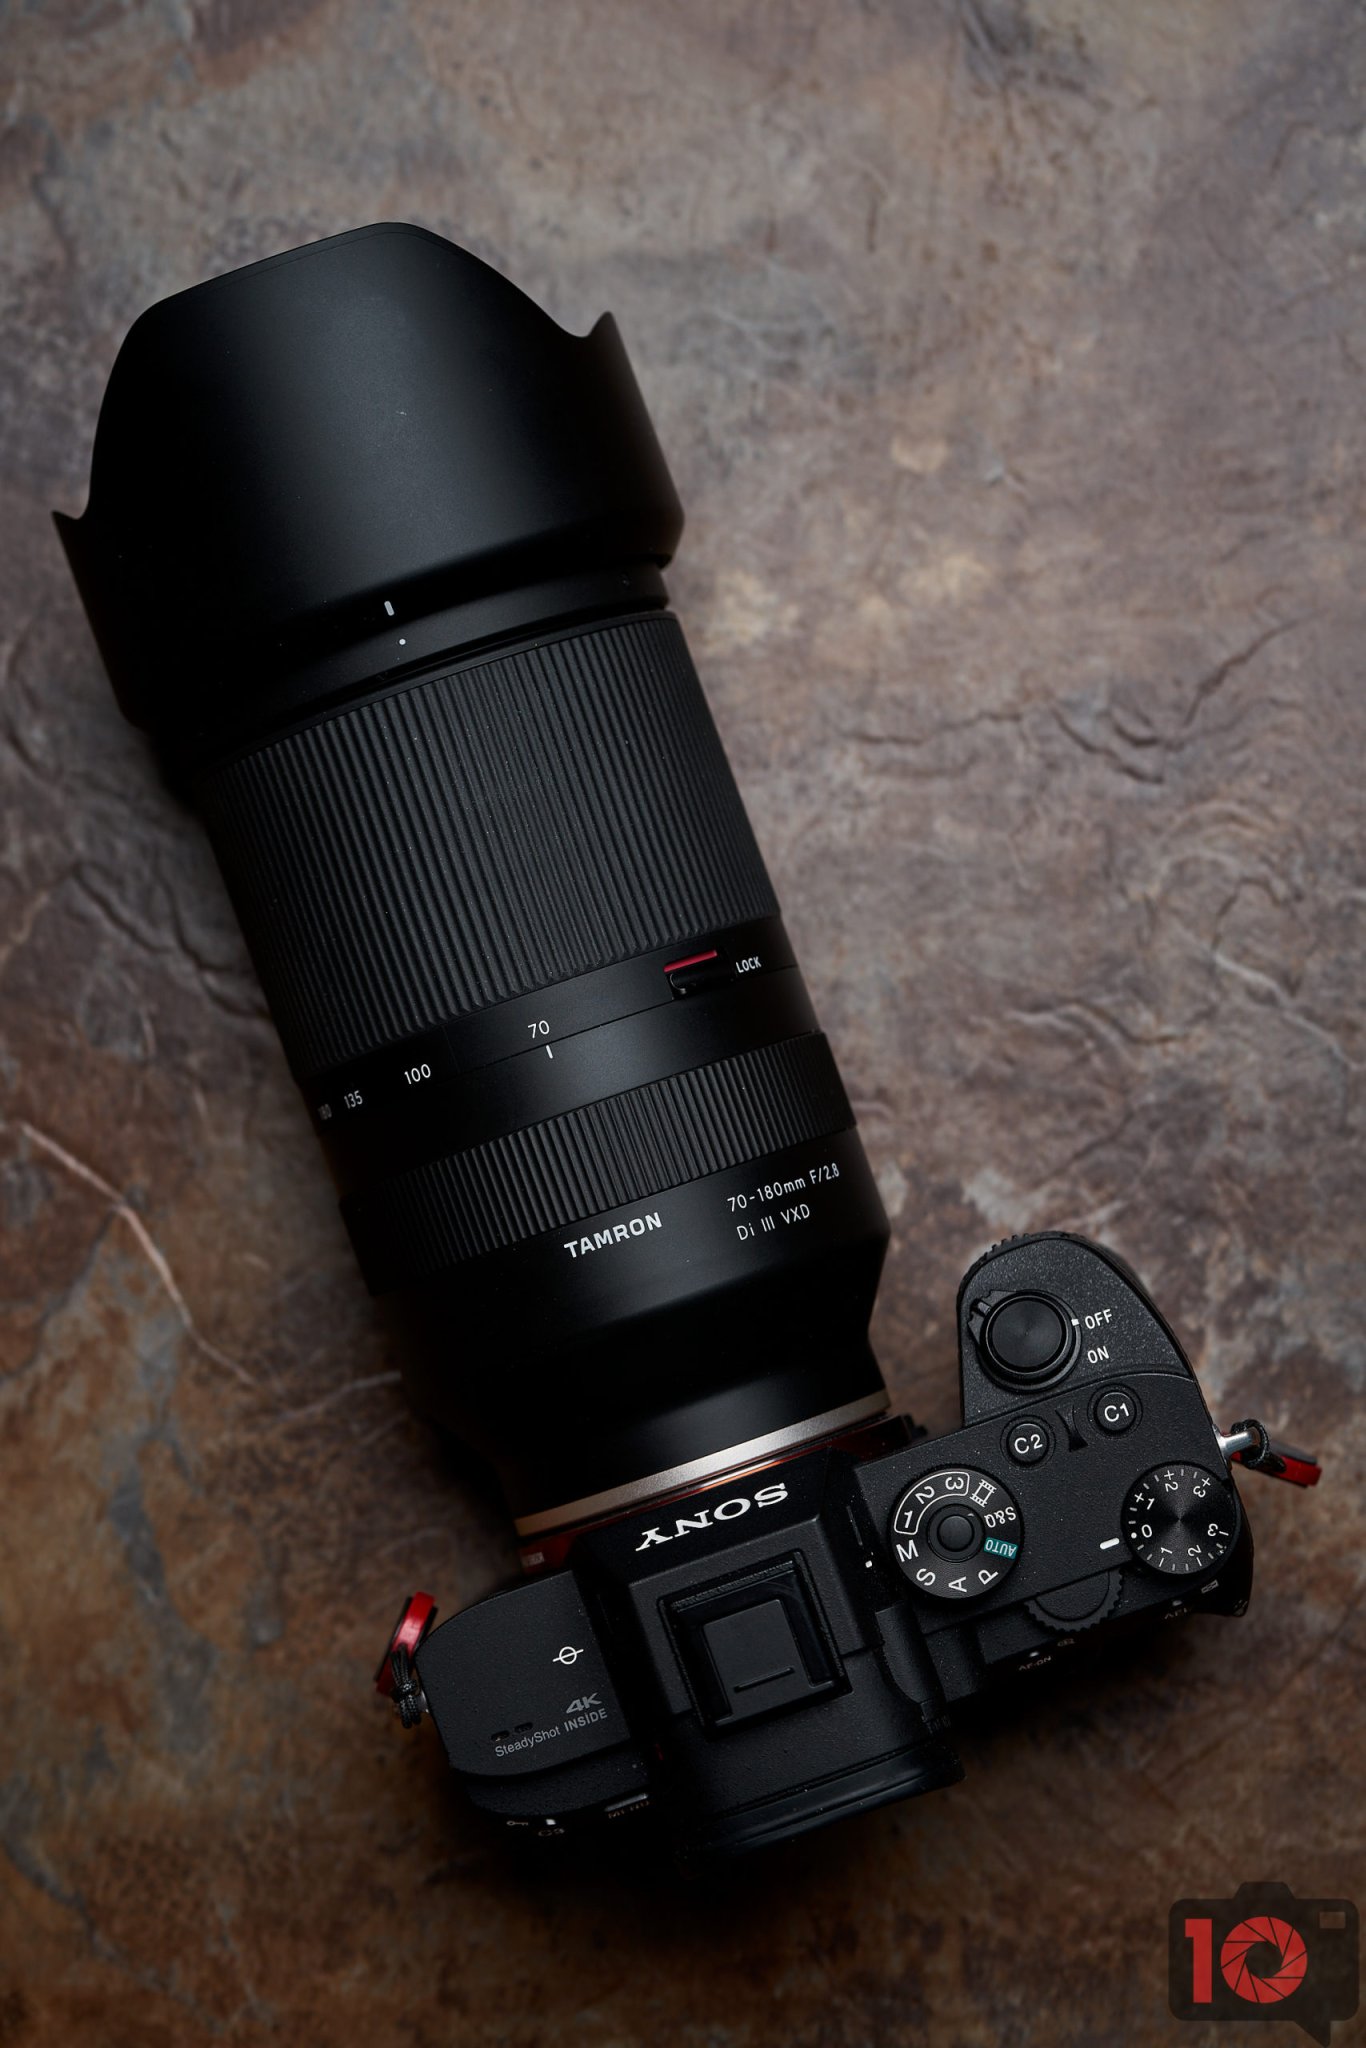 Do The Extra 20mm Really Matter? The Tamron 70-180mm f2.8 Review